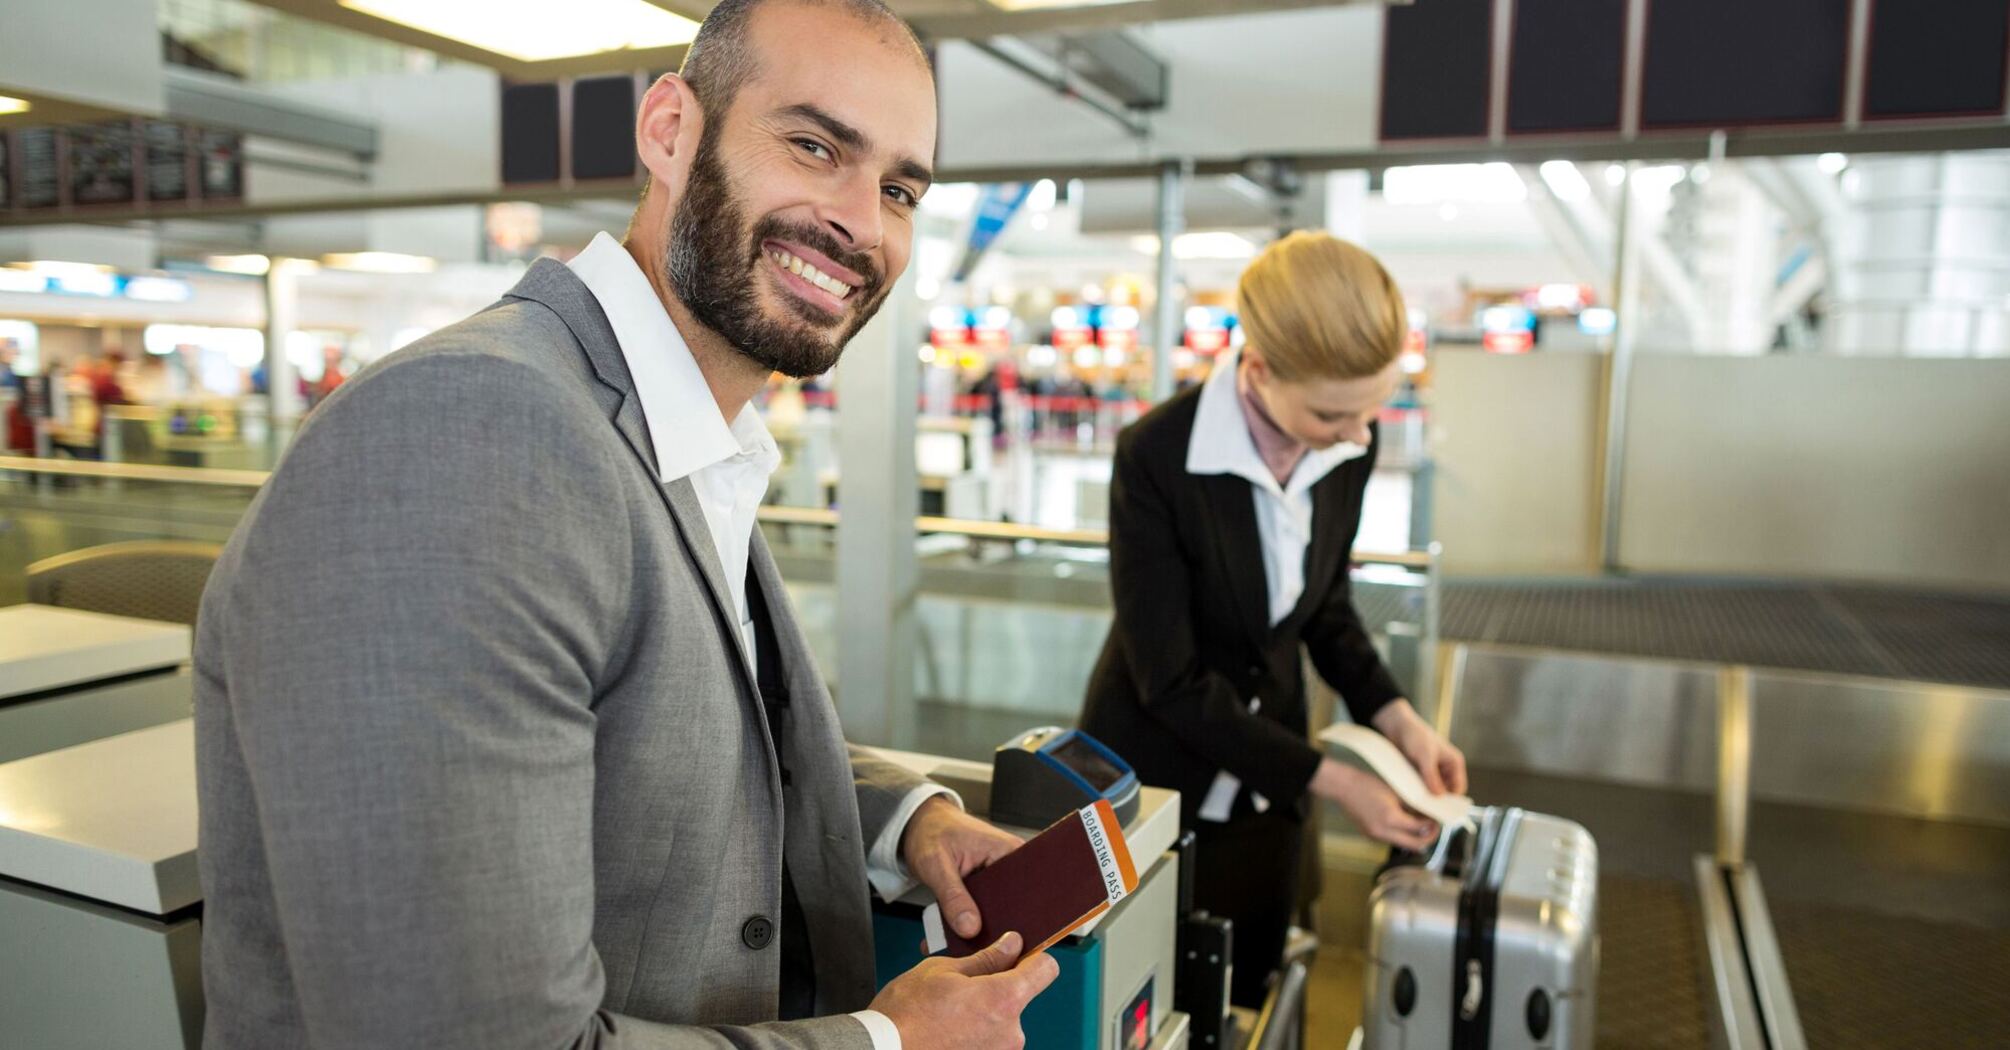 5 reasons to get caught at the airport